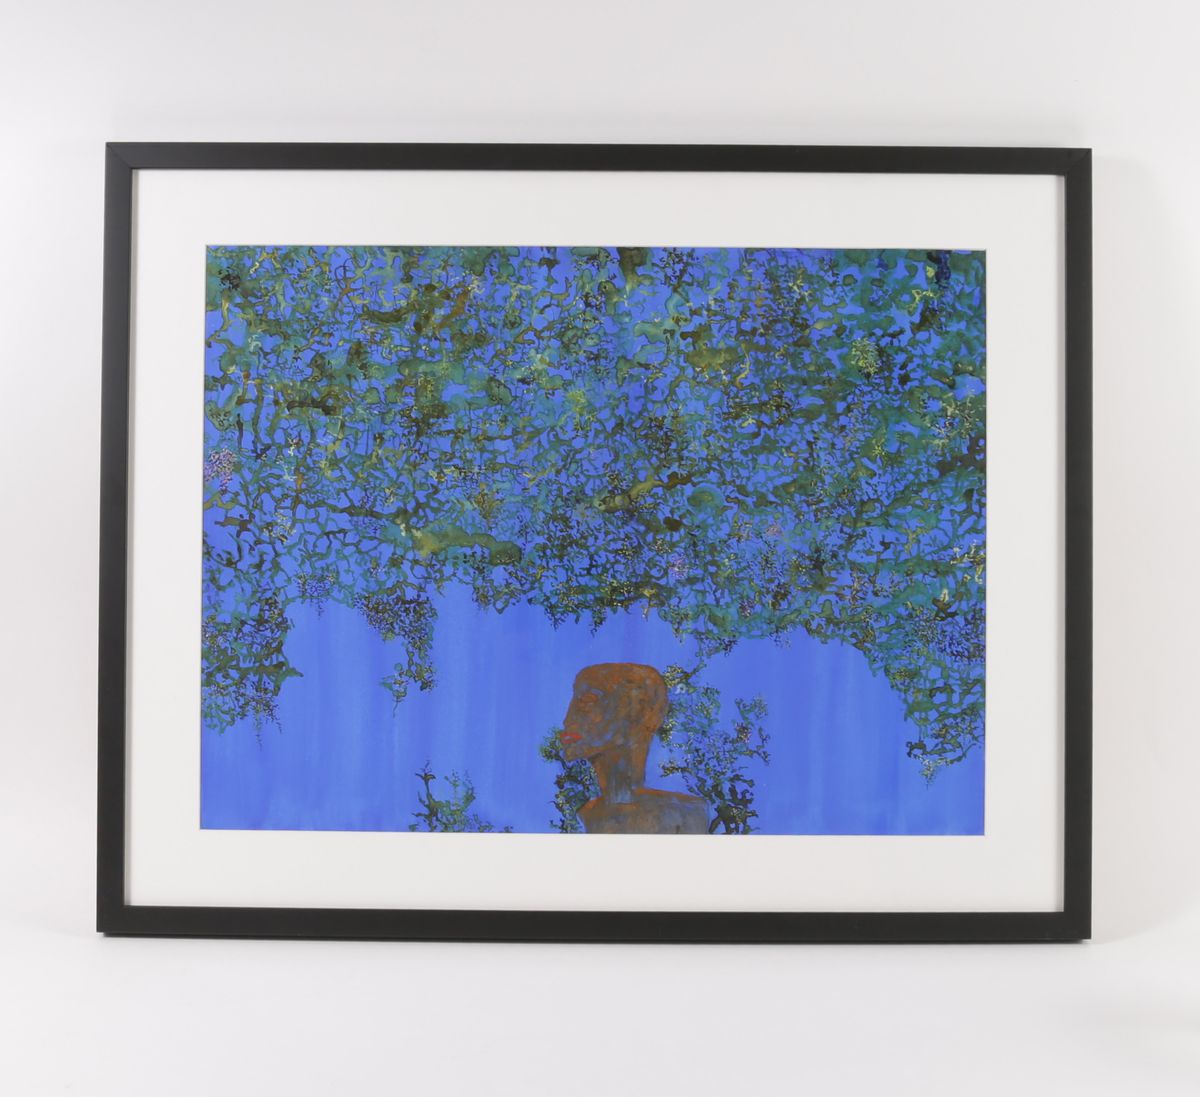 A painting of blue sky and leaves with a figure’s silhouette.